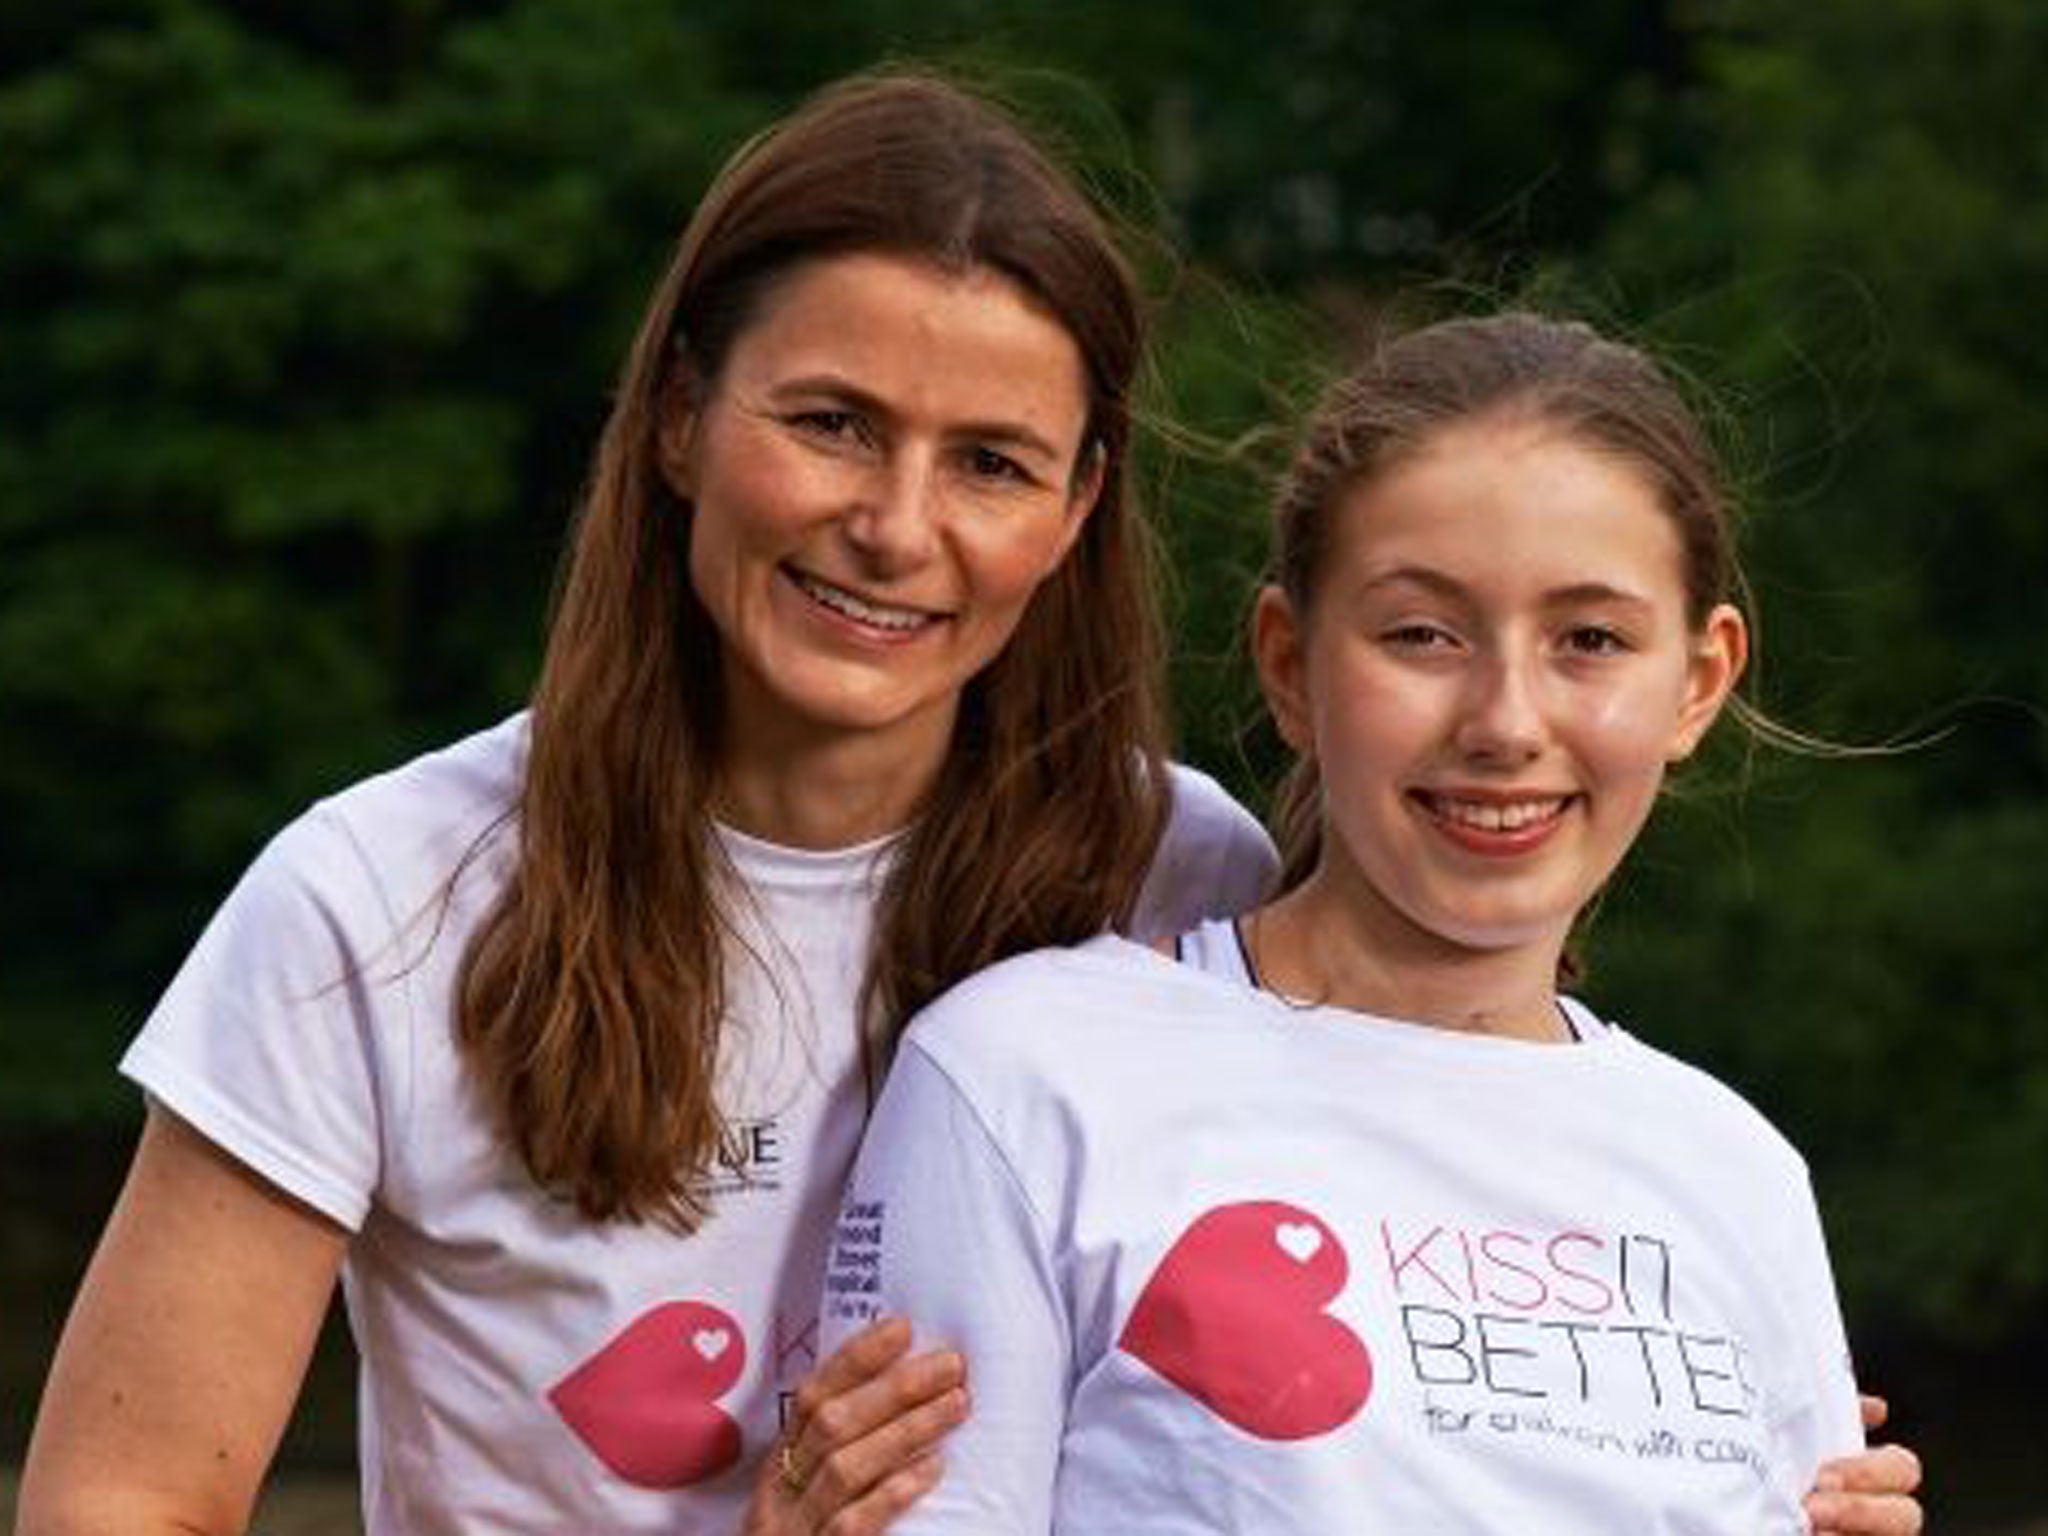 Carmel Allen and Josephine Drew
Charity Founders Carmel, from London, founded the “Kiss it Better” appeal after her daughter Josephine was treated at Great Ormond Street Hospital for neuroblastoma, a rare childhood cancer. Today, 10 years later, Josephin